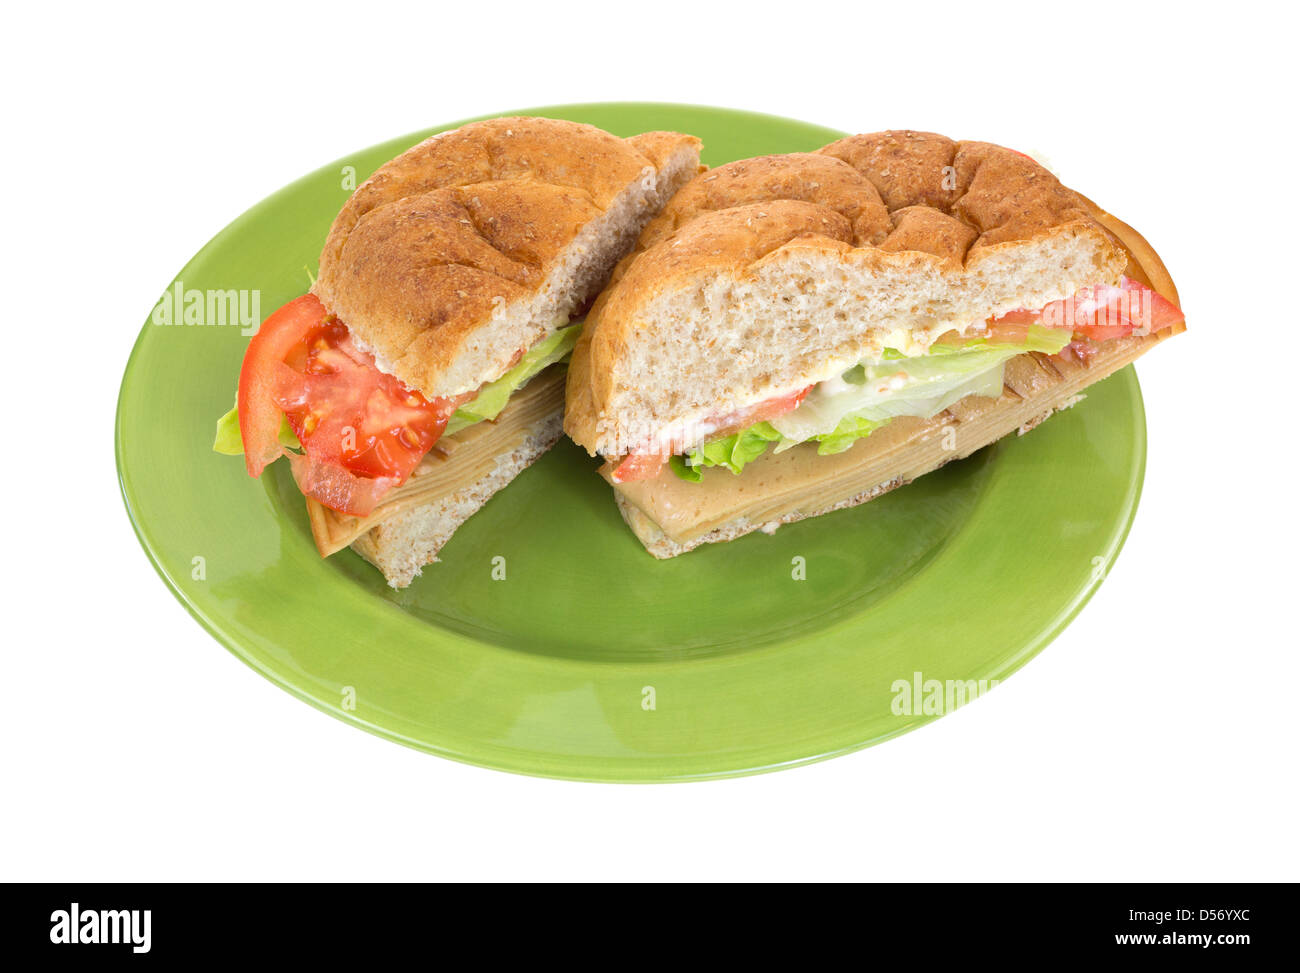 A wheat bulky roll tofu meatless turkey sandwich with lettuce tomatoes and mayonnaise sliced in half on a green plate. Stock Photo